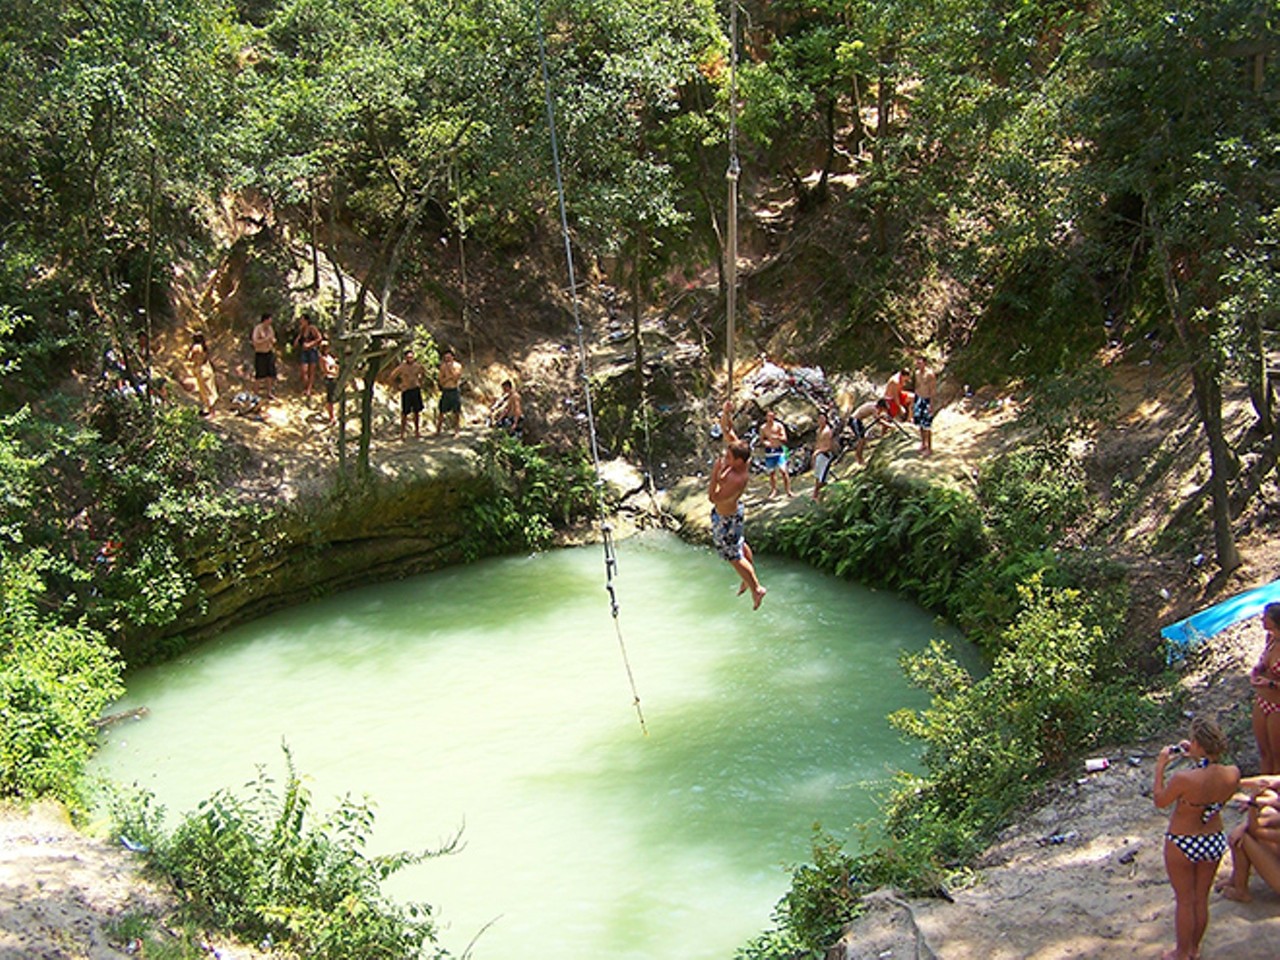 Devil's Hole in Hawthorne, Fla.
Before the landowners posted no trespassing signs along the surrounding area, tourists could plunge into the sinkhole's murky green water thanks to a rope swing at the top of the vegetation. Kowabunga into Hell!
Photo via roadtrippers.com